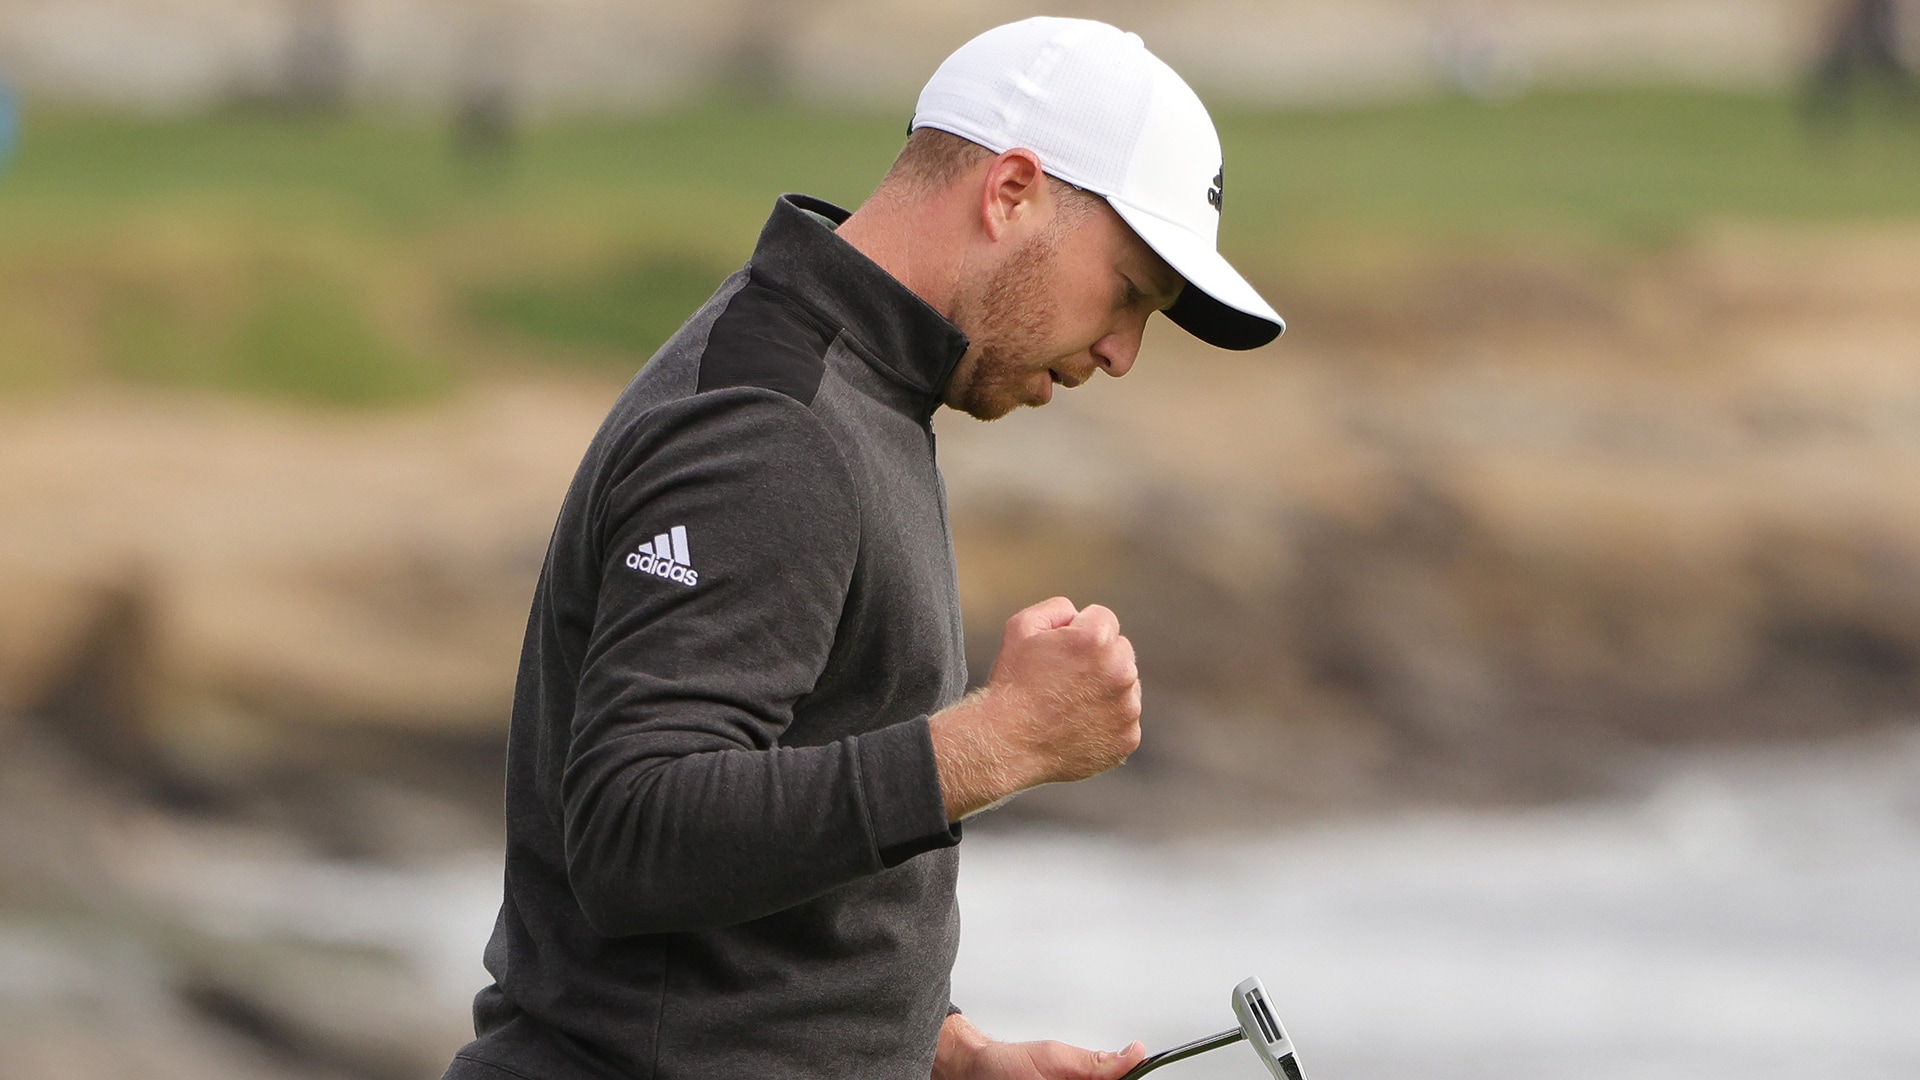 Watch: Putt of his life gives Daniel Berger closing eagle, Pebble Beach title